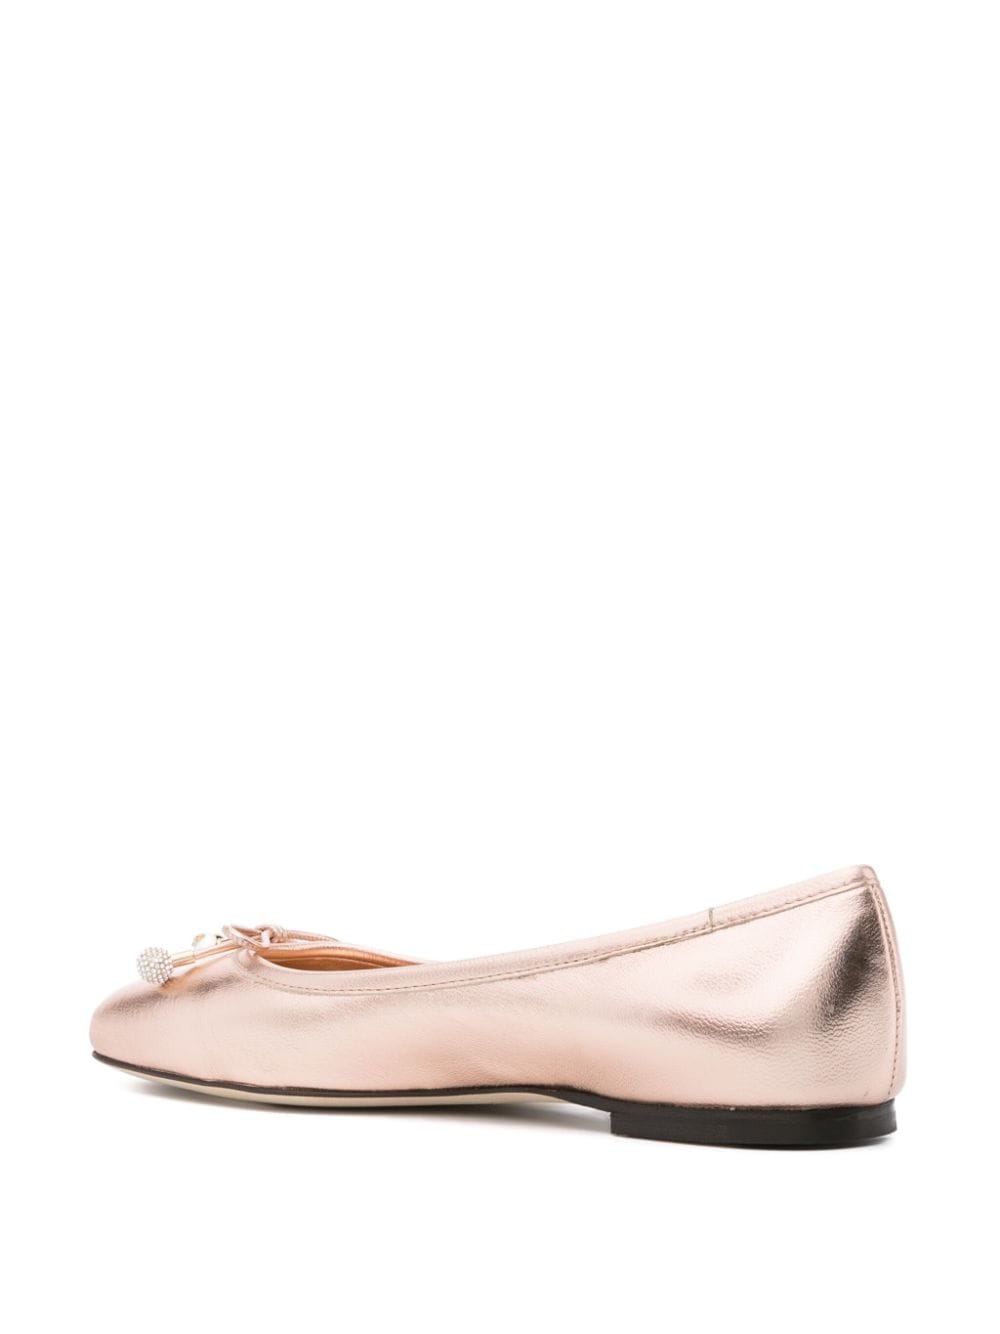 JIMMY CHOO Powder Pink Metallic Leather Ballet Flats with Bow Detailing and Square Toe